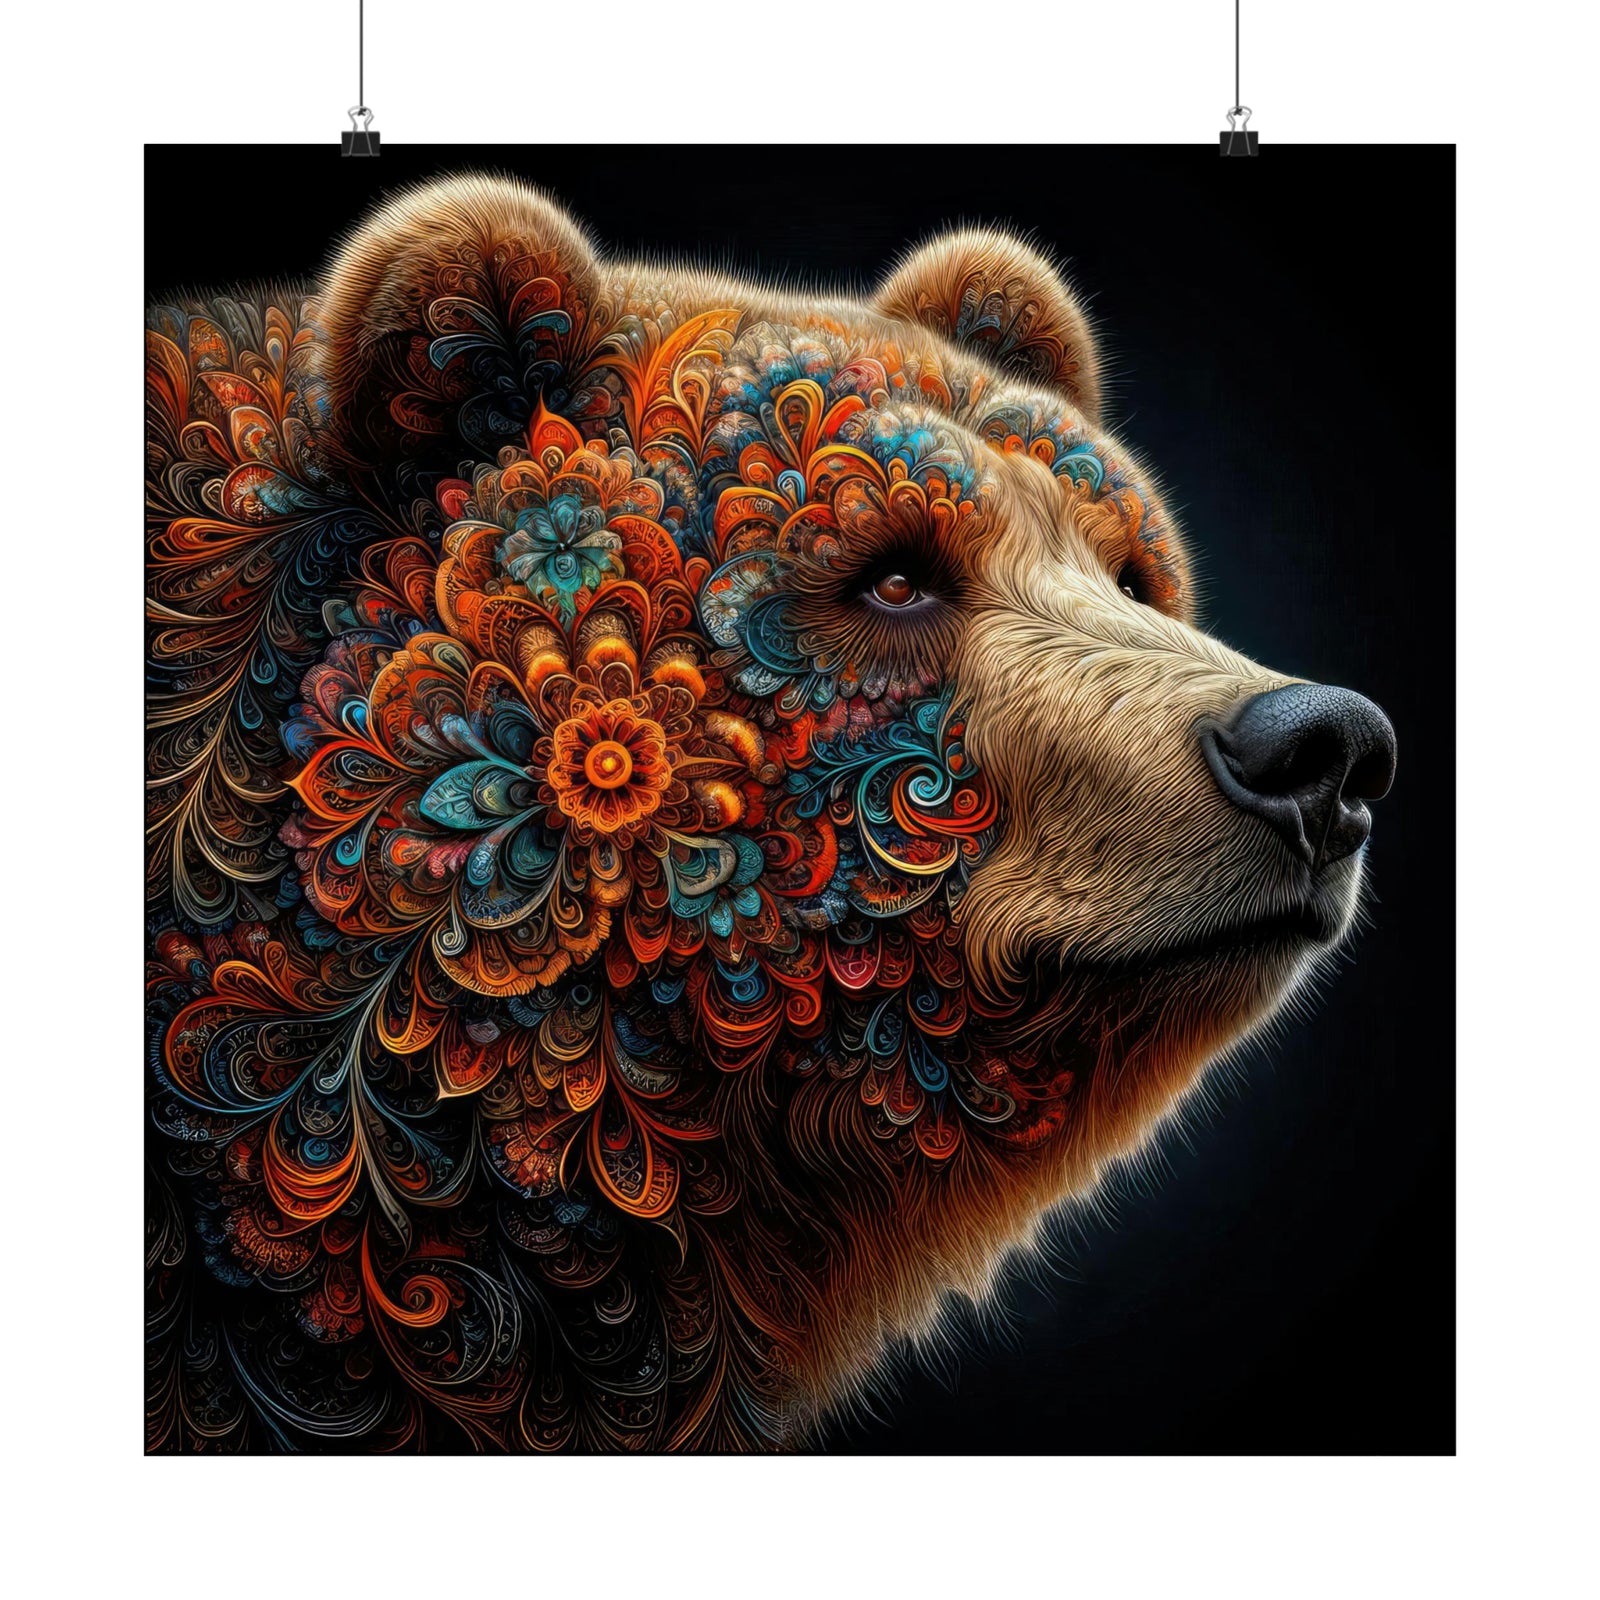 The Ornate Essence of the Grizzly Poster